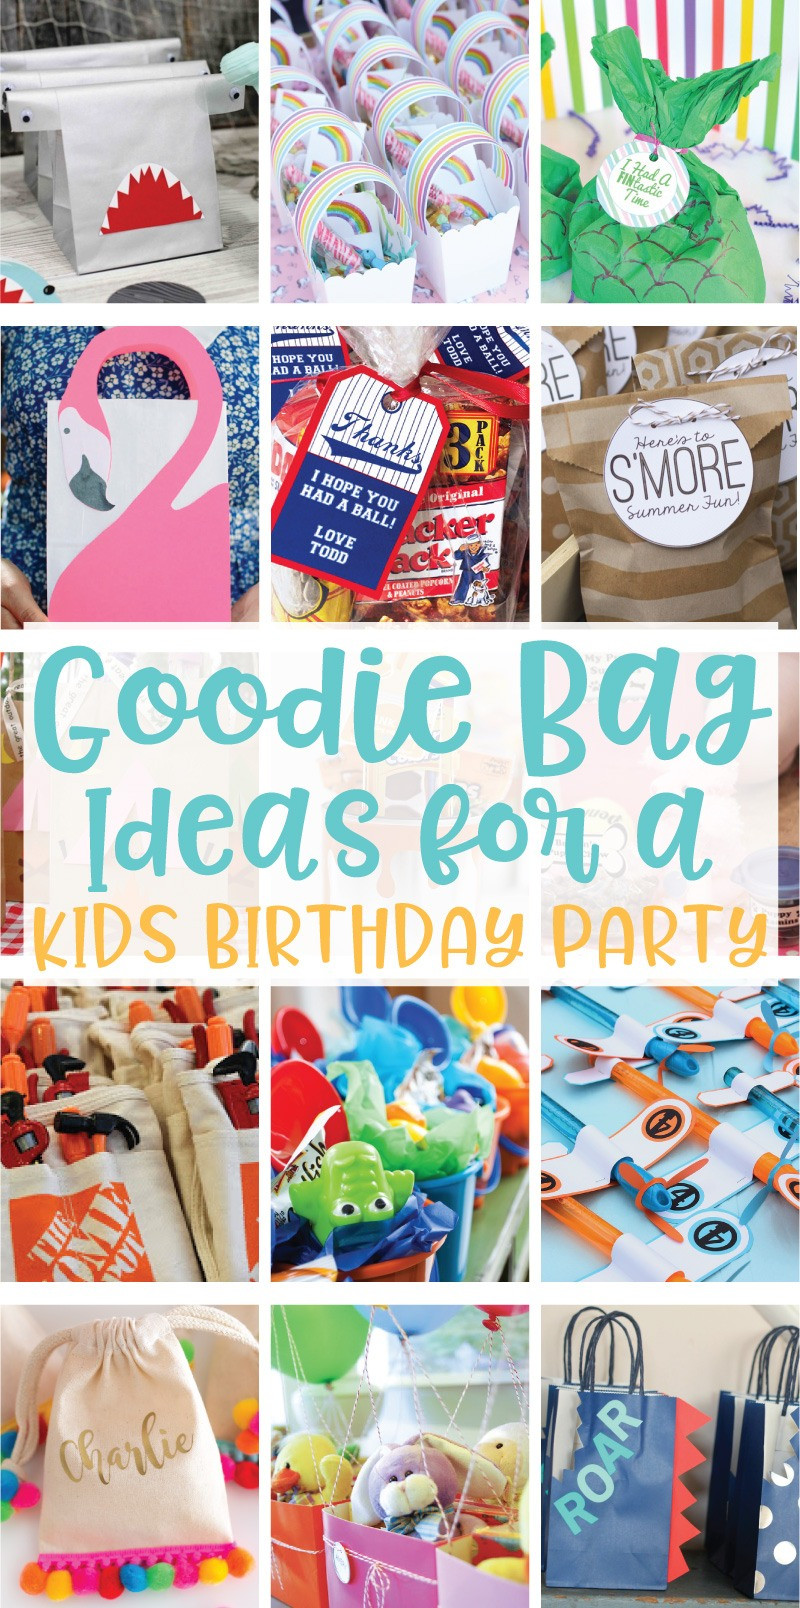 Birthday Gift Bags For Kids
 20 Creative Goo Bag Ideas for Kids Birthday Parties on